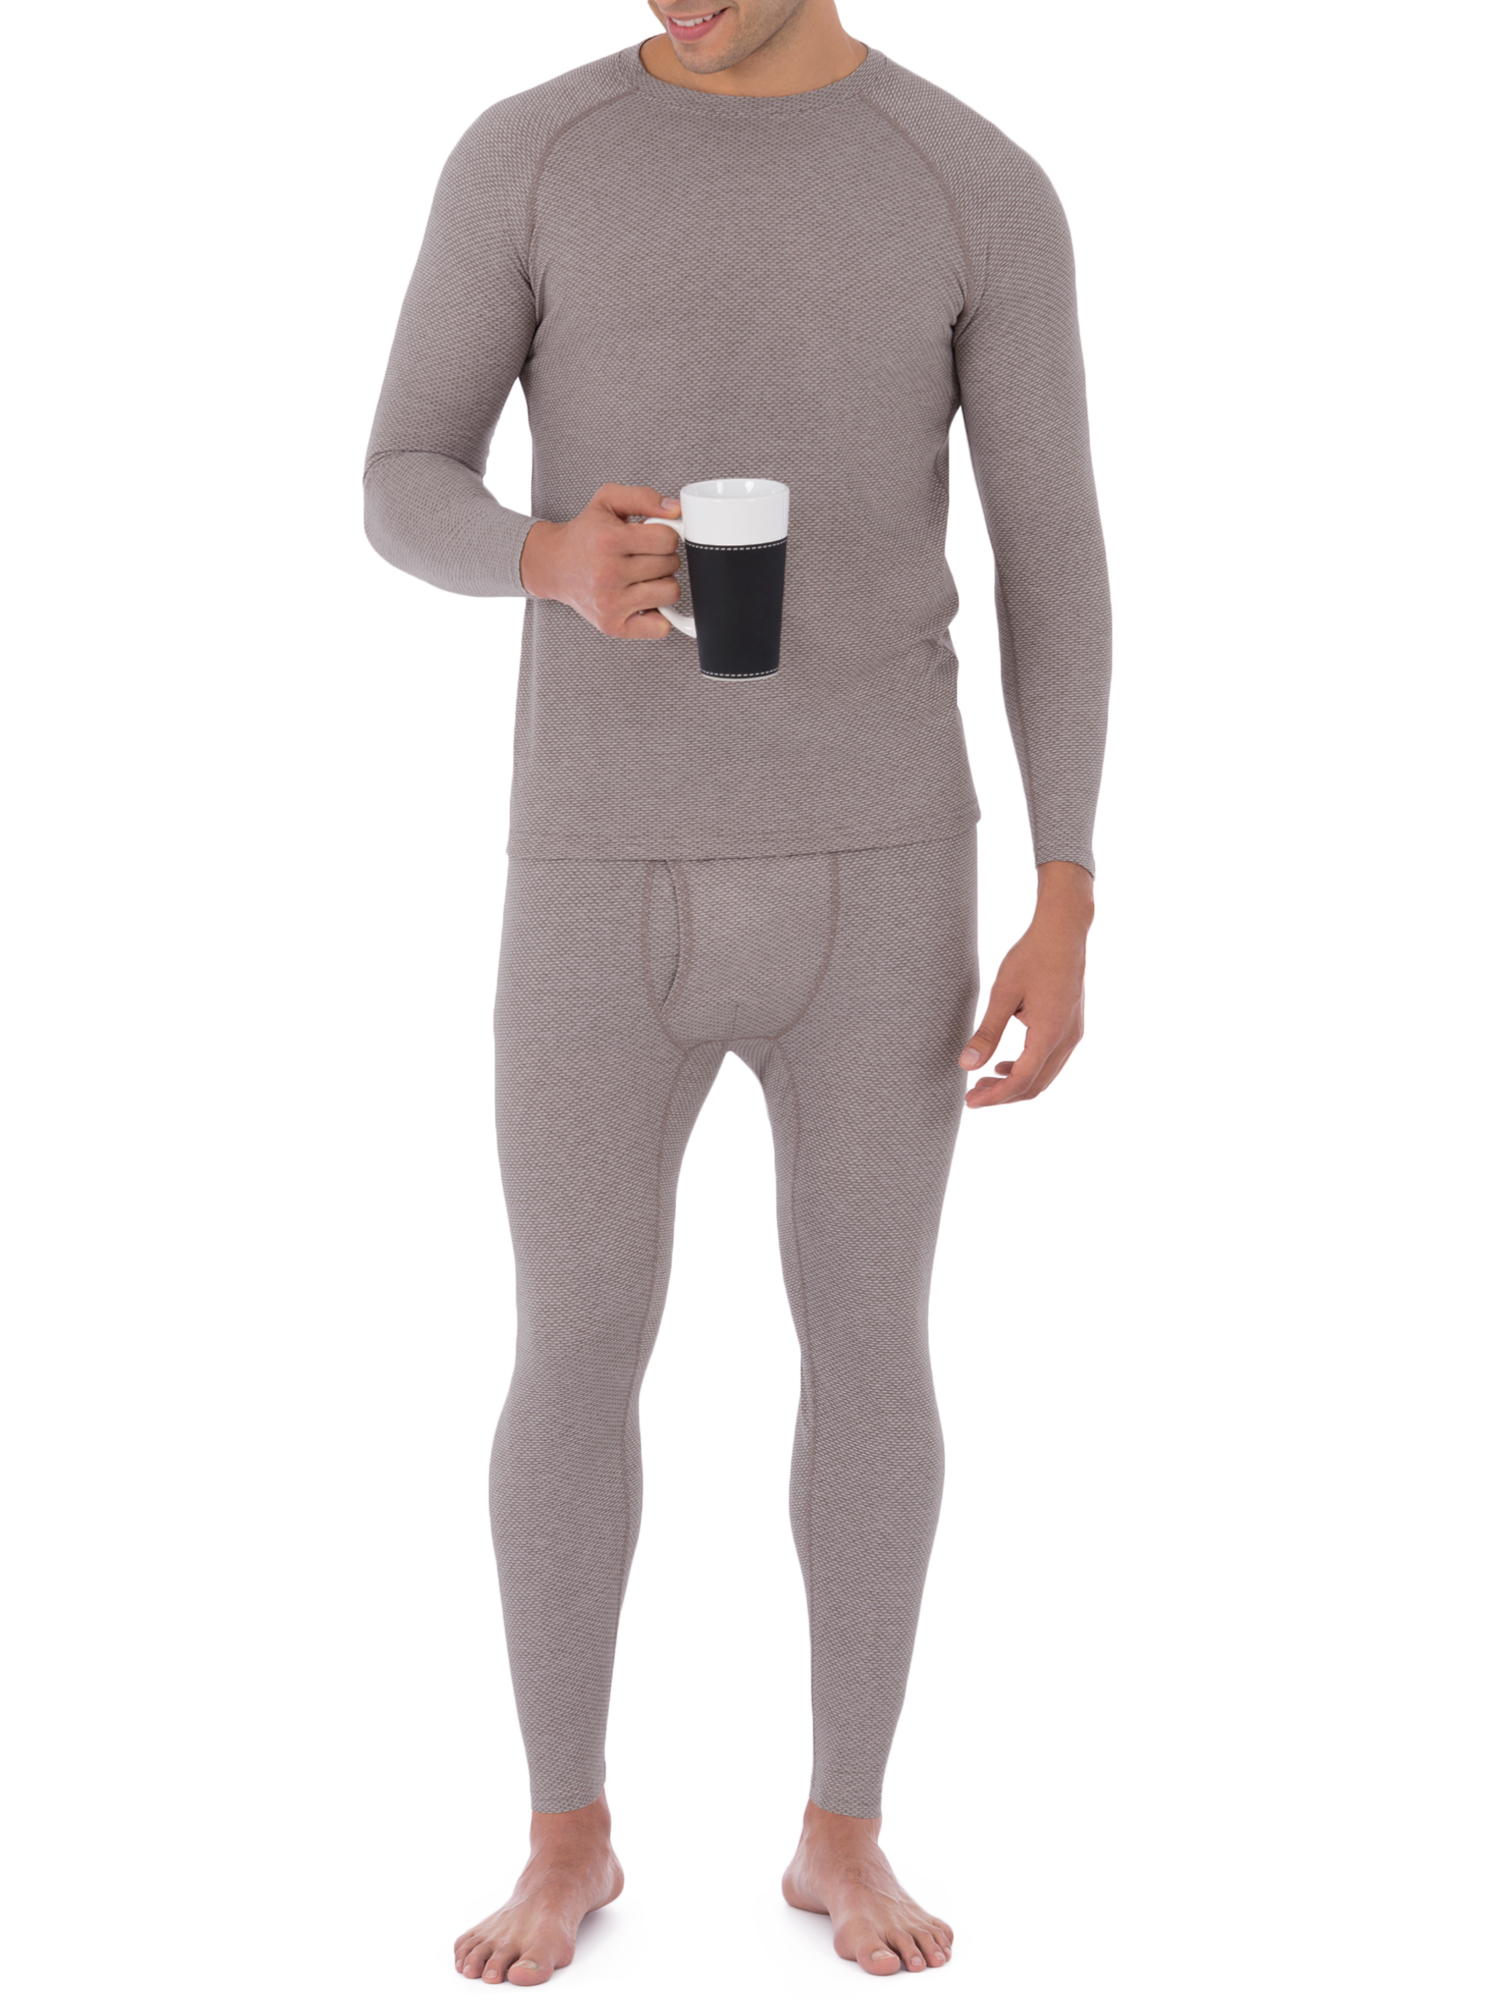 Fruit of the Loom Big Men's Breathable Super Cozy Thermal Shirt Underwear for Men - image 3 of 5